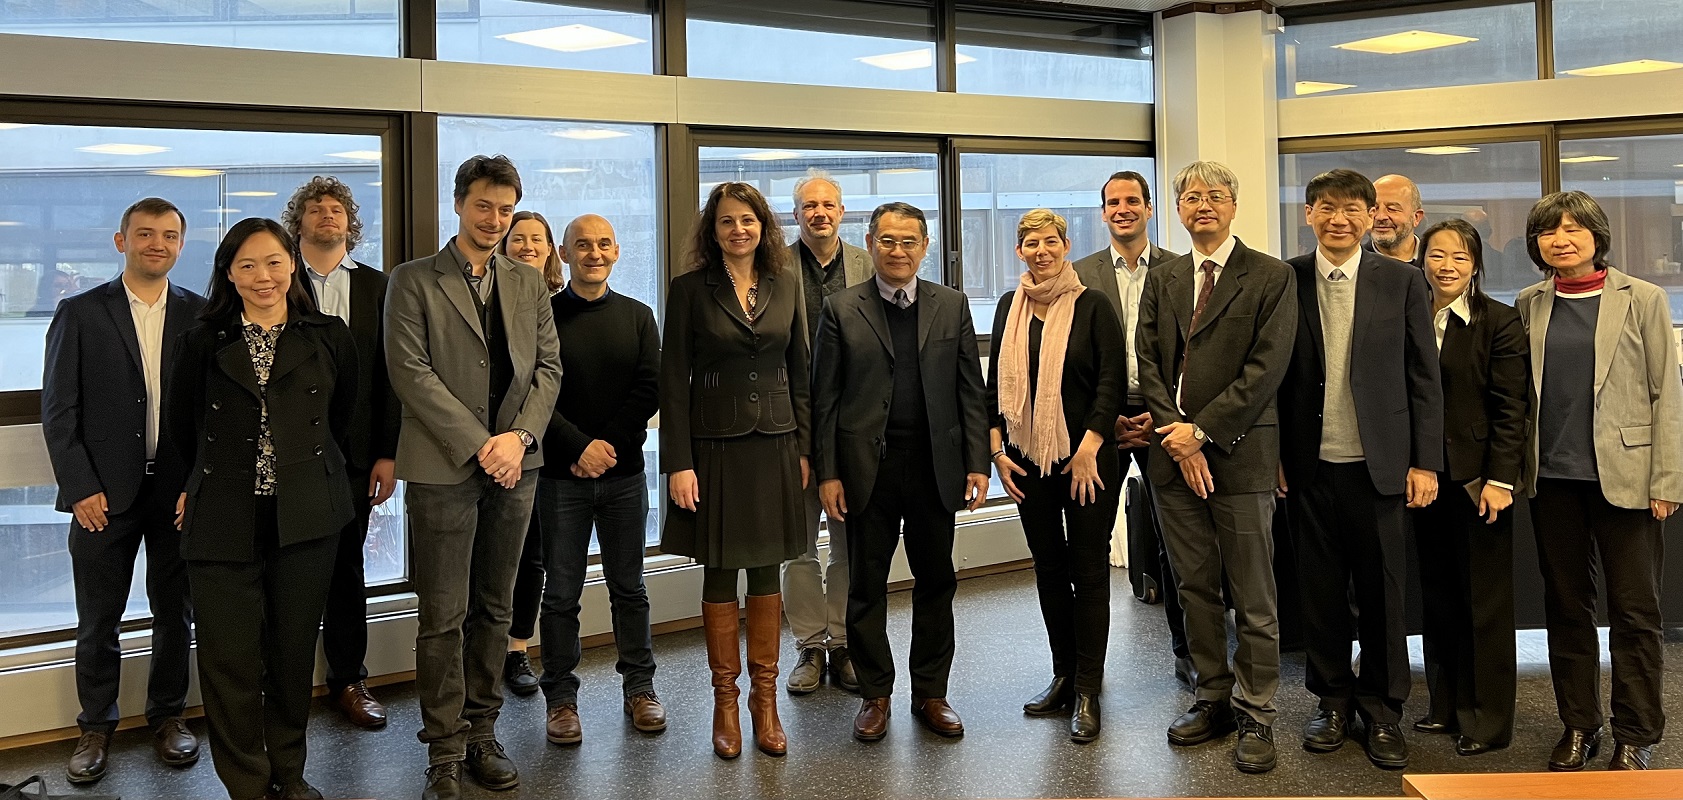 Visit to University of Paris-Saclay  (6th from left: Frédéric Chazal, Director, DATAIA Institute, University of Paris-Saclay; 7th from left: Estelle Iacona, University President; 8th from left: Michel Guidal, University Deputy Vice-President; 8th from right: Lin Faa-Jeng, President, NARLabs; 5th from right: Hou Tuo-Hung (Alex), Director General, TSRI; 4th from right: Lin Fang-Pang, Deputy Director General, NCHC; 2nd from right: Chang Mei-Yu, Director, International Affairs Office of NARLabs)